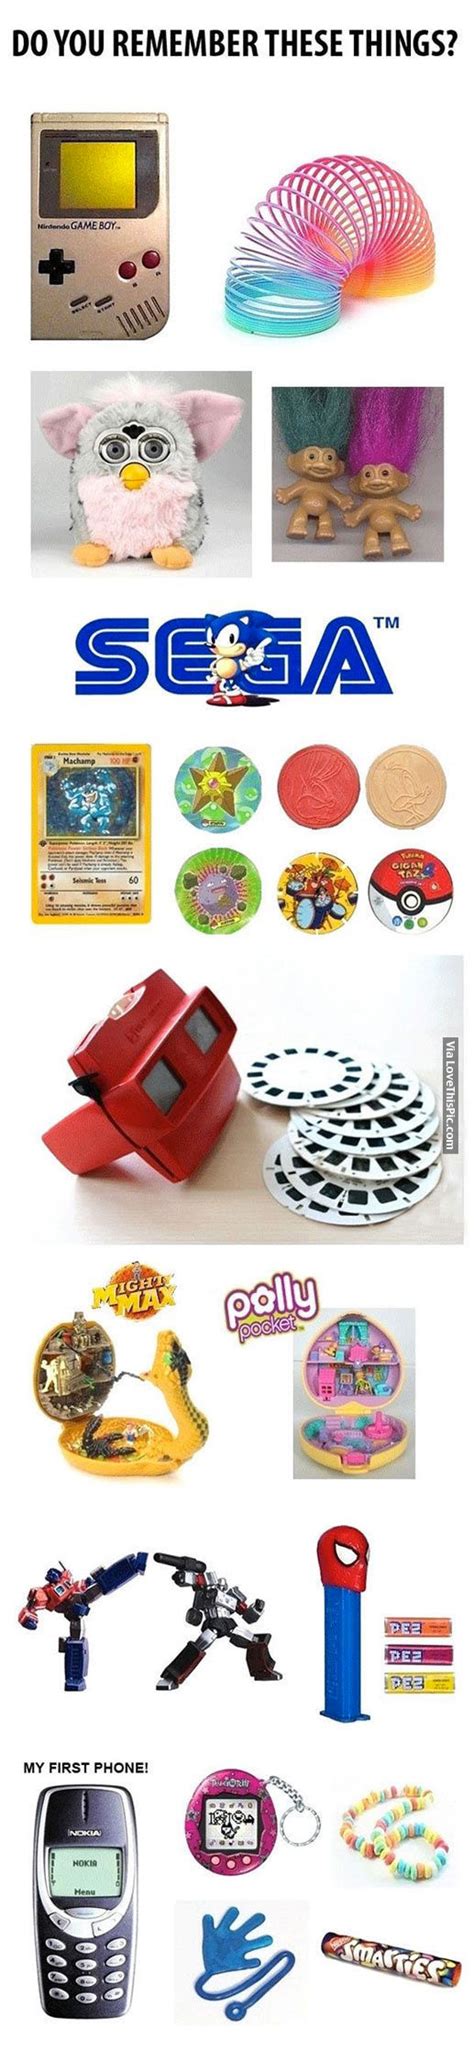 Do You Remember These Things Pictures Photos And Images For Facebook